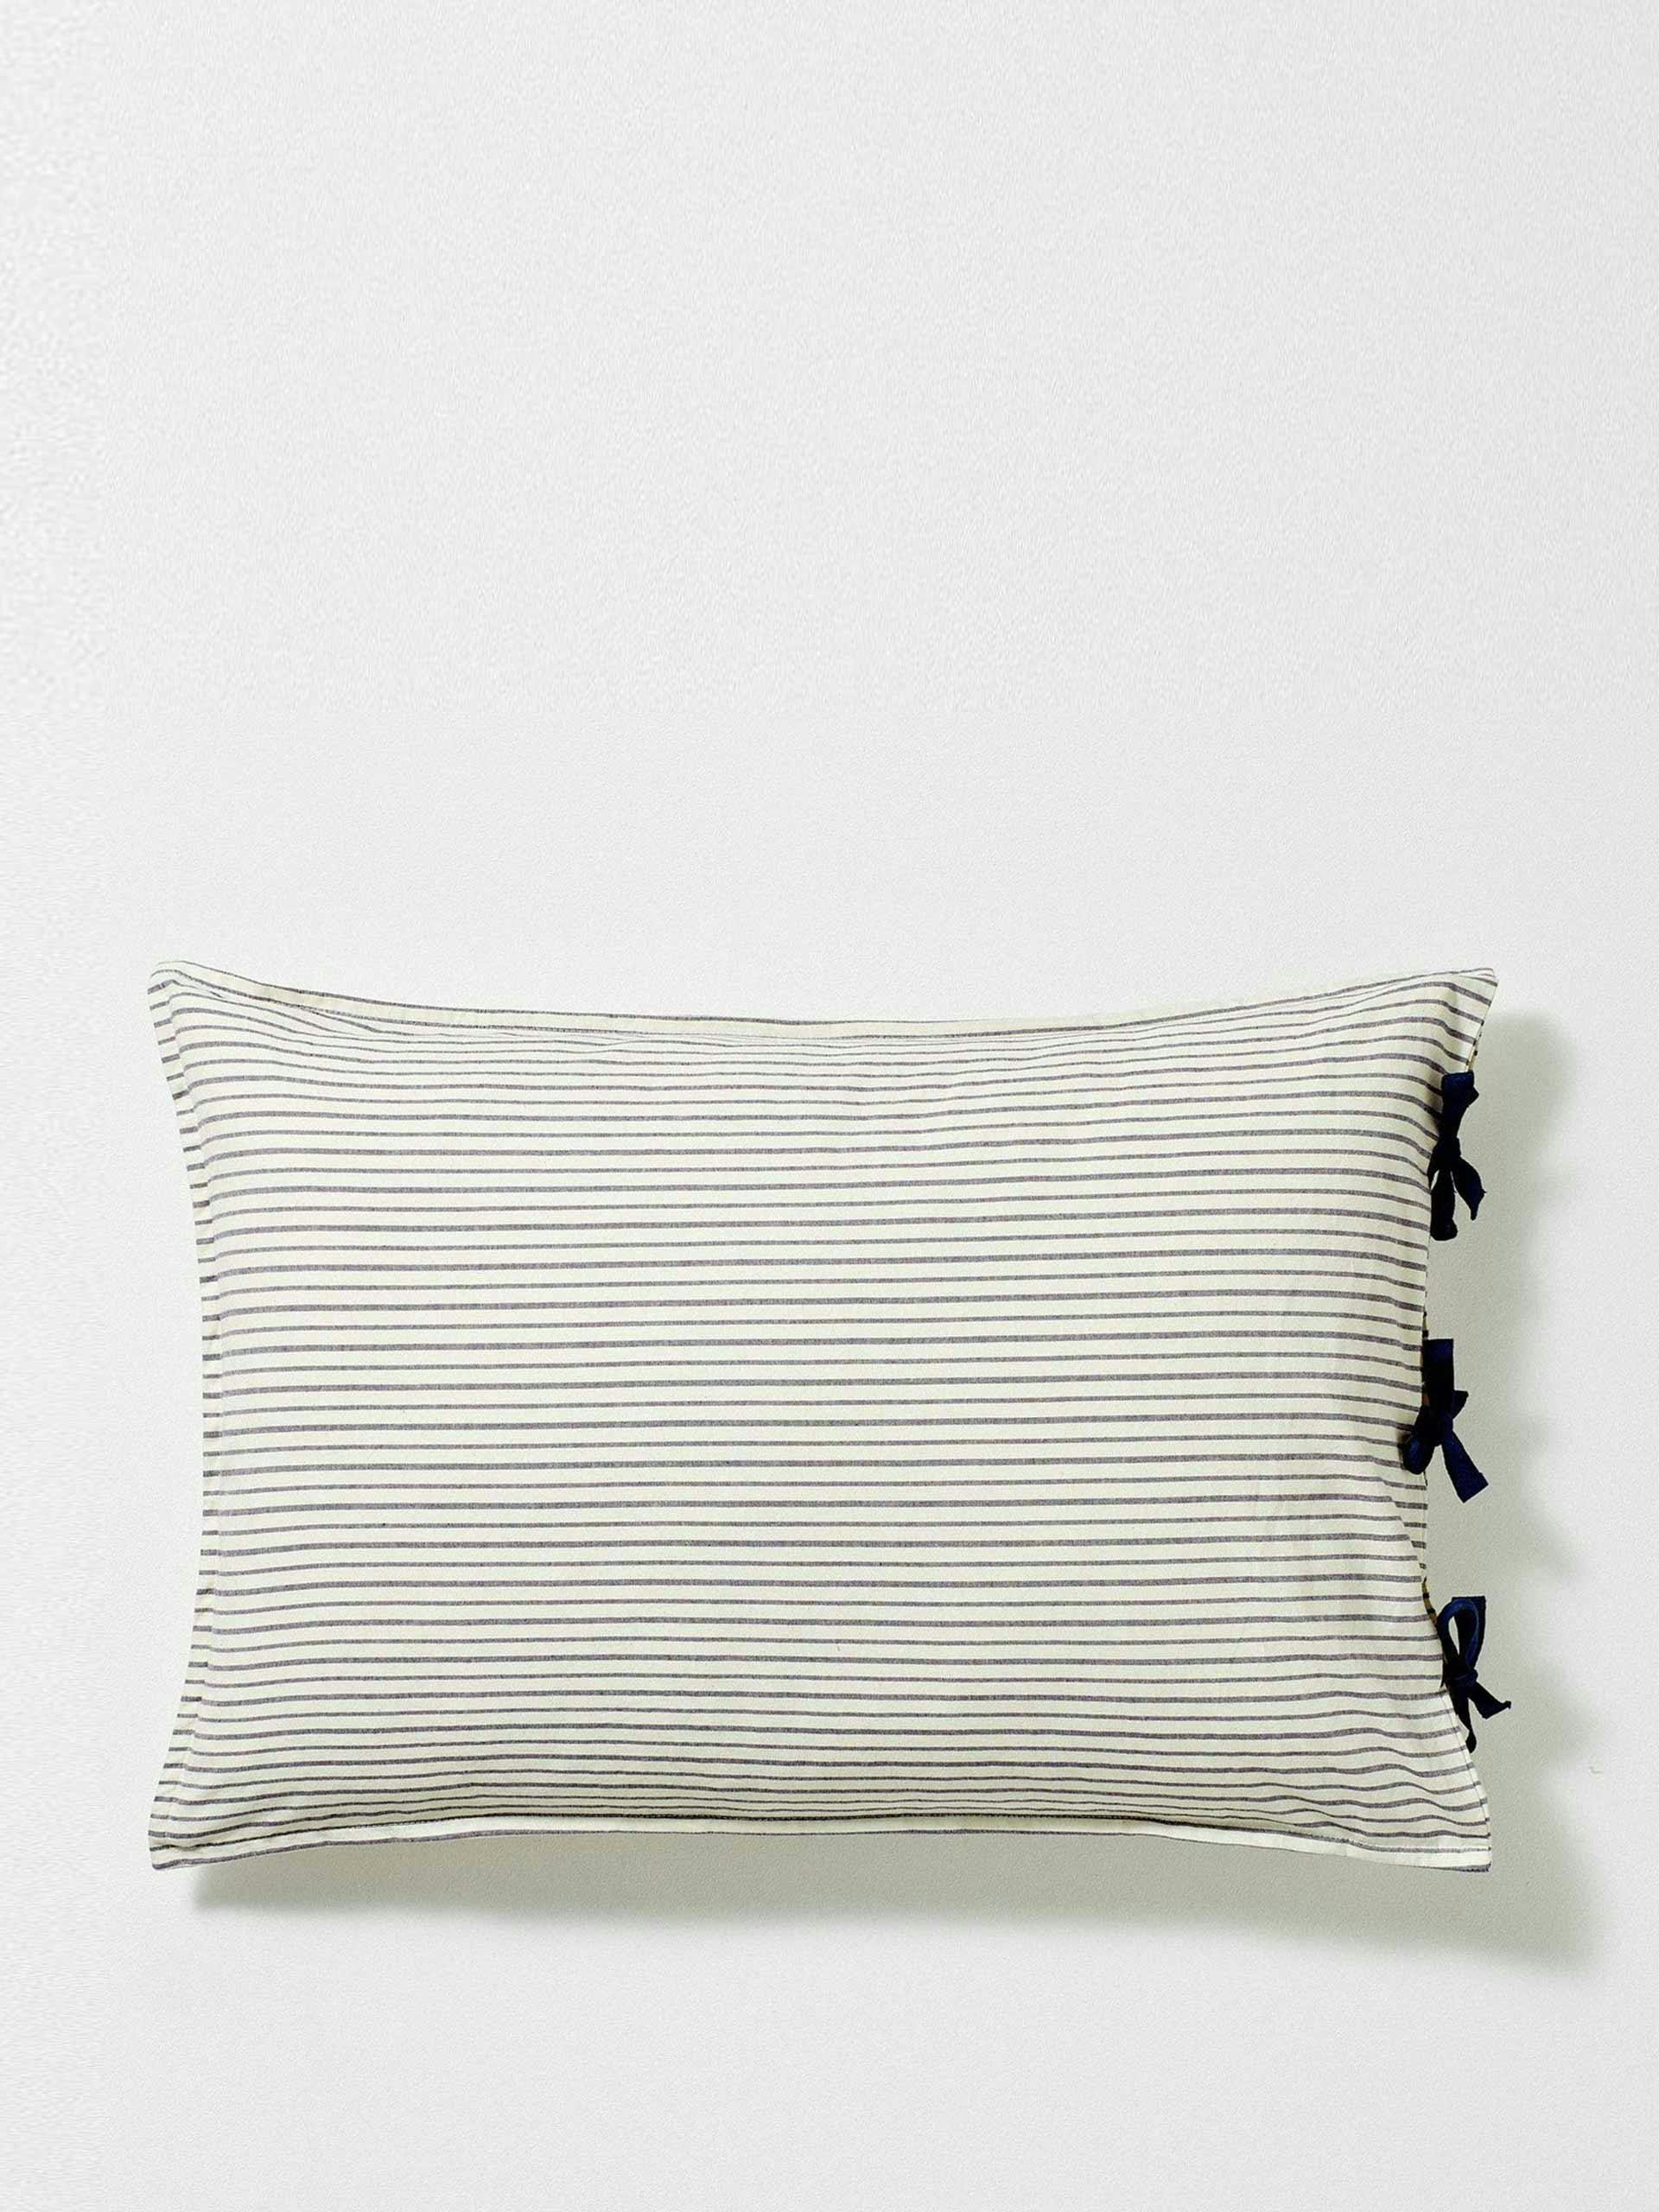 Navy and white striped pillow